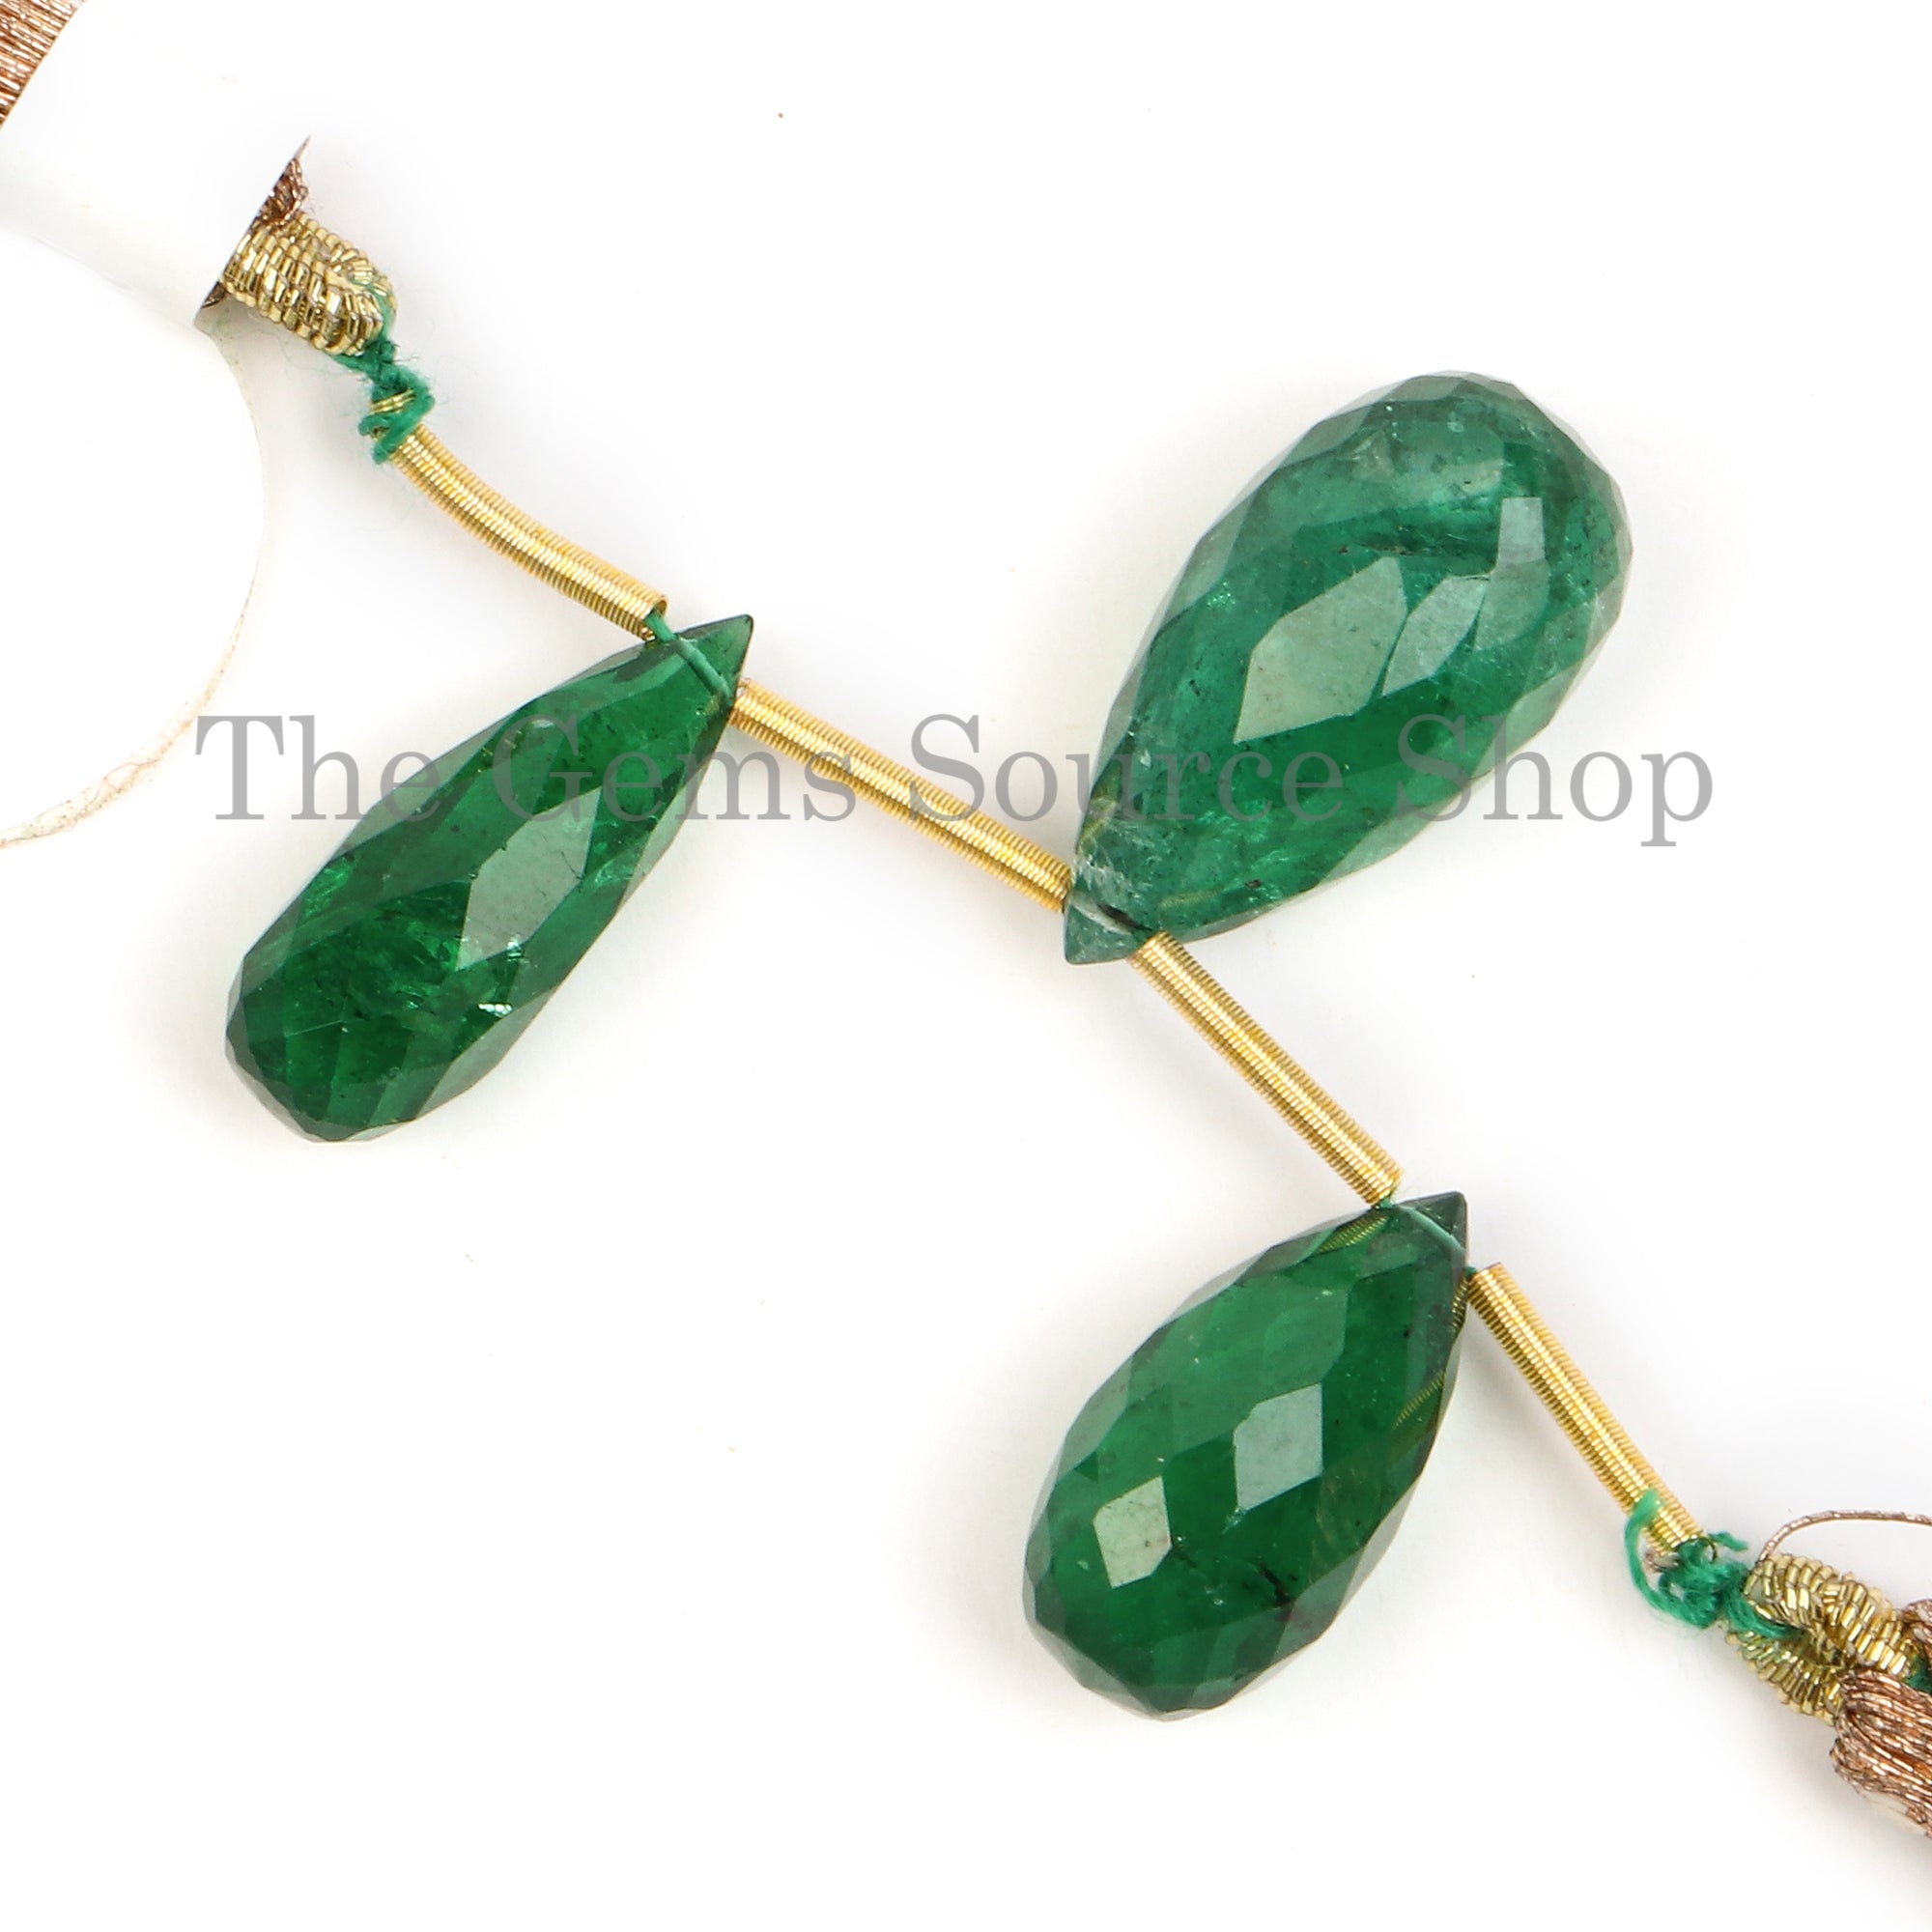 Super Top Quality Natural Emerald Beads, Faceted Drop Beads, Gemstone Tear Drop Briolette